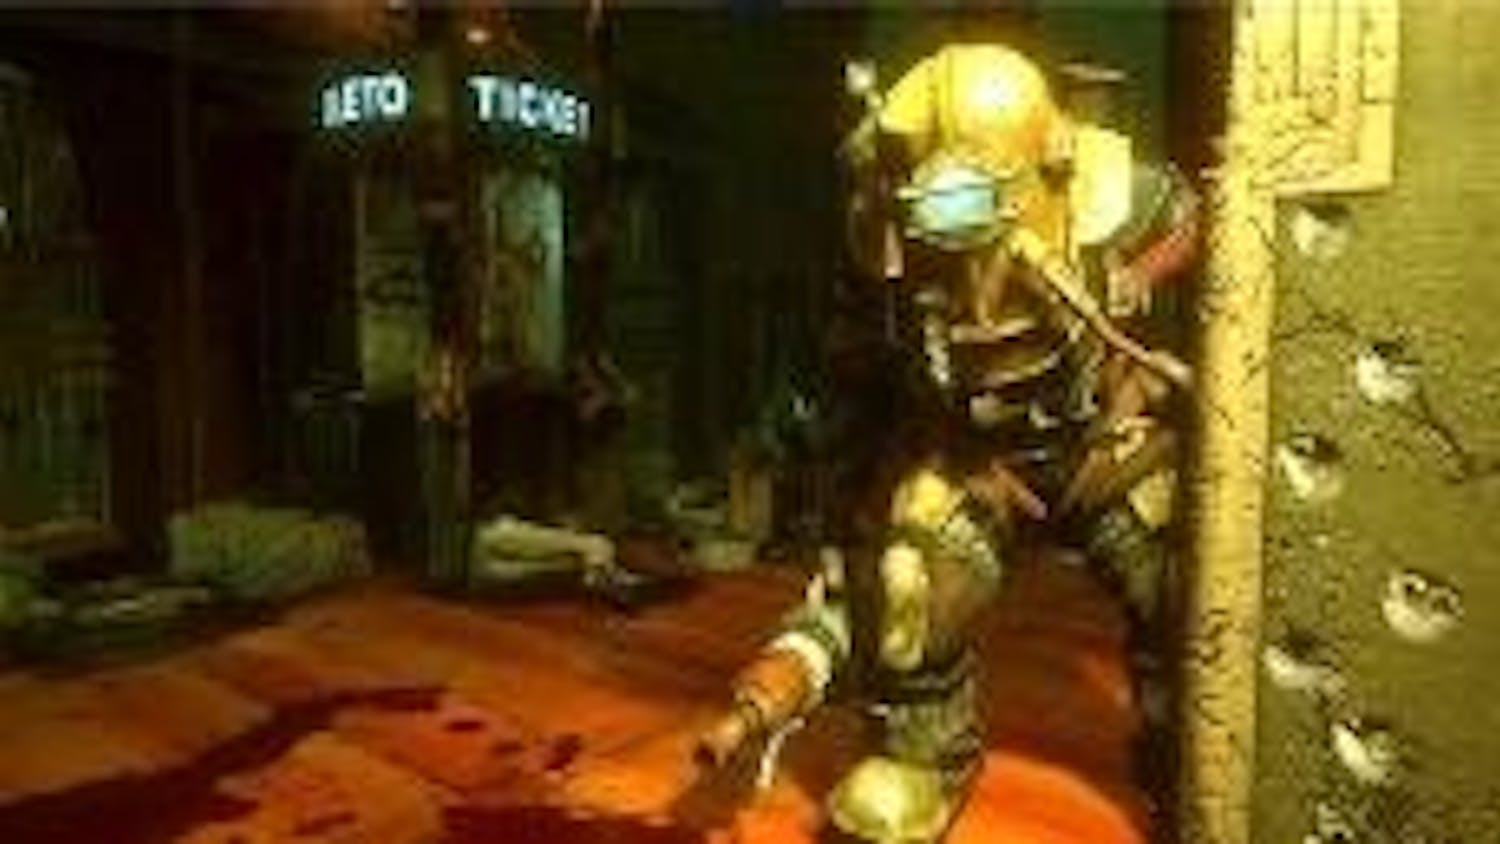 BIG DADDY SHOOTER - A Big Daddy, one of the primary enemies in "Bioshock," lurks around a corner, waiting to surprise Jack, the game's protagonist. Jack can dispose of Big Daddies using either firearms or ingenuity.